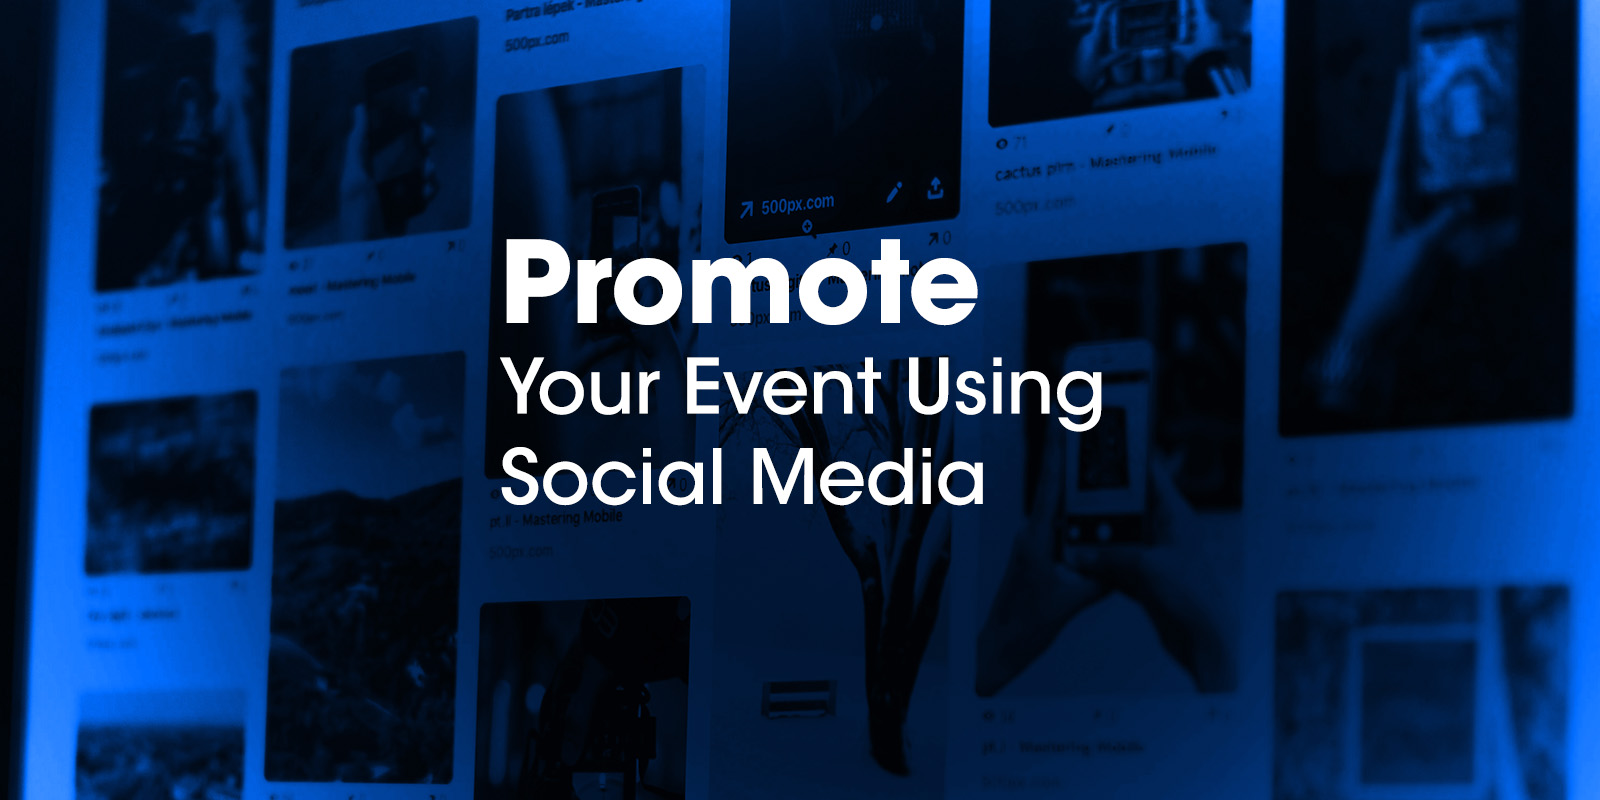 social media to promote your event blog